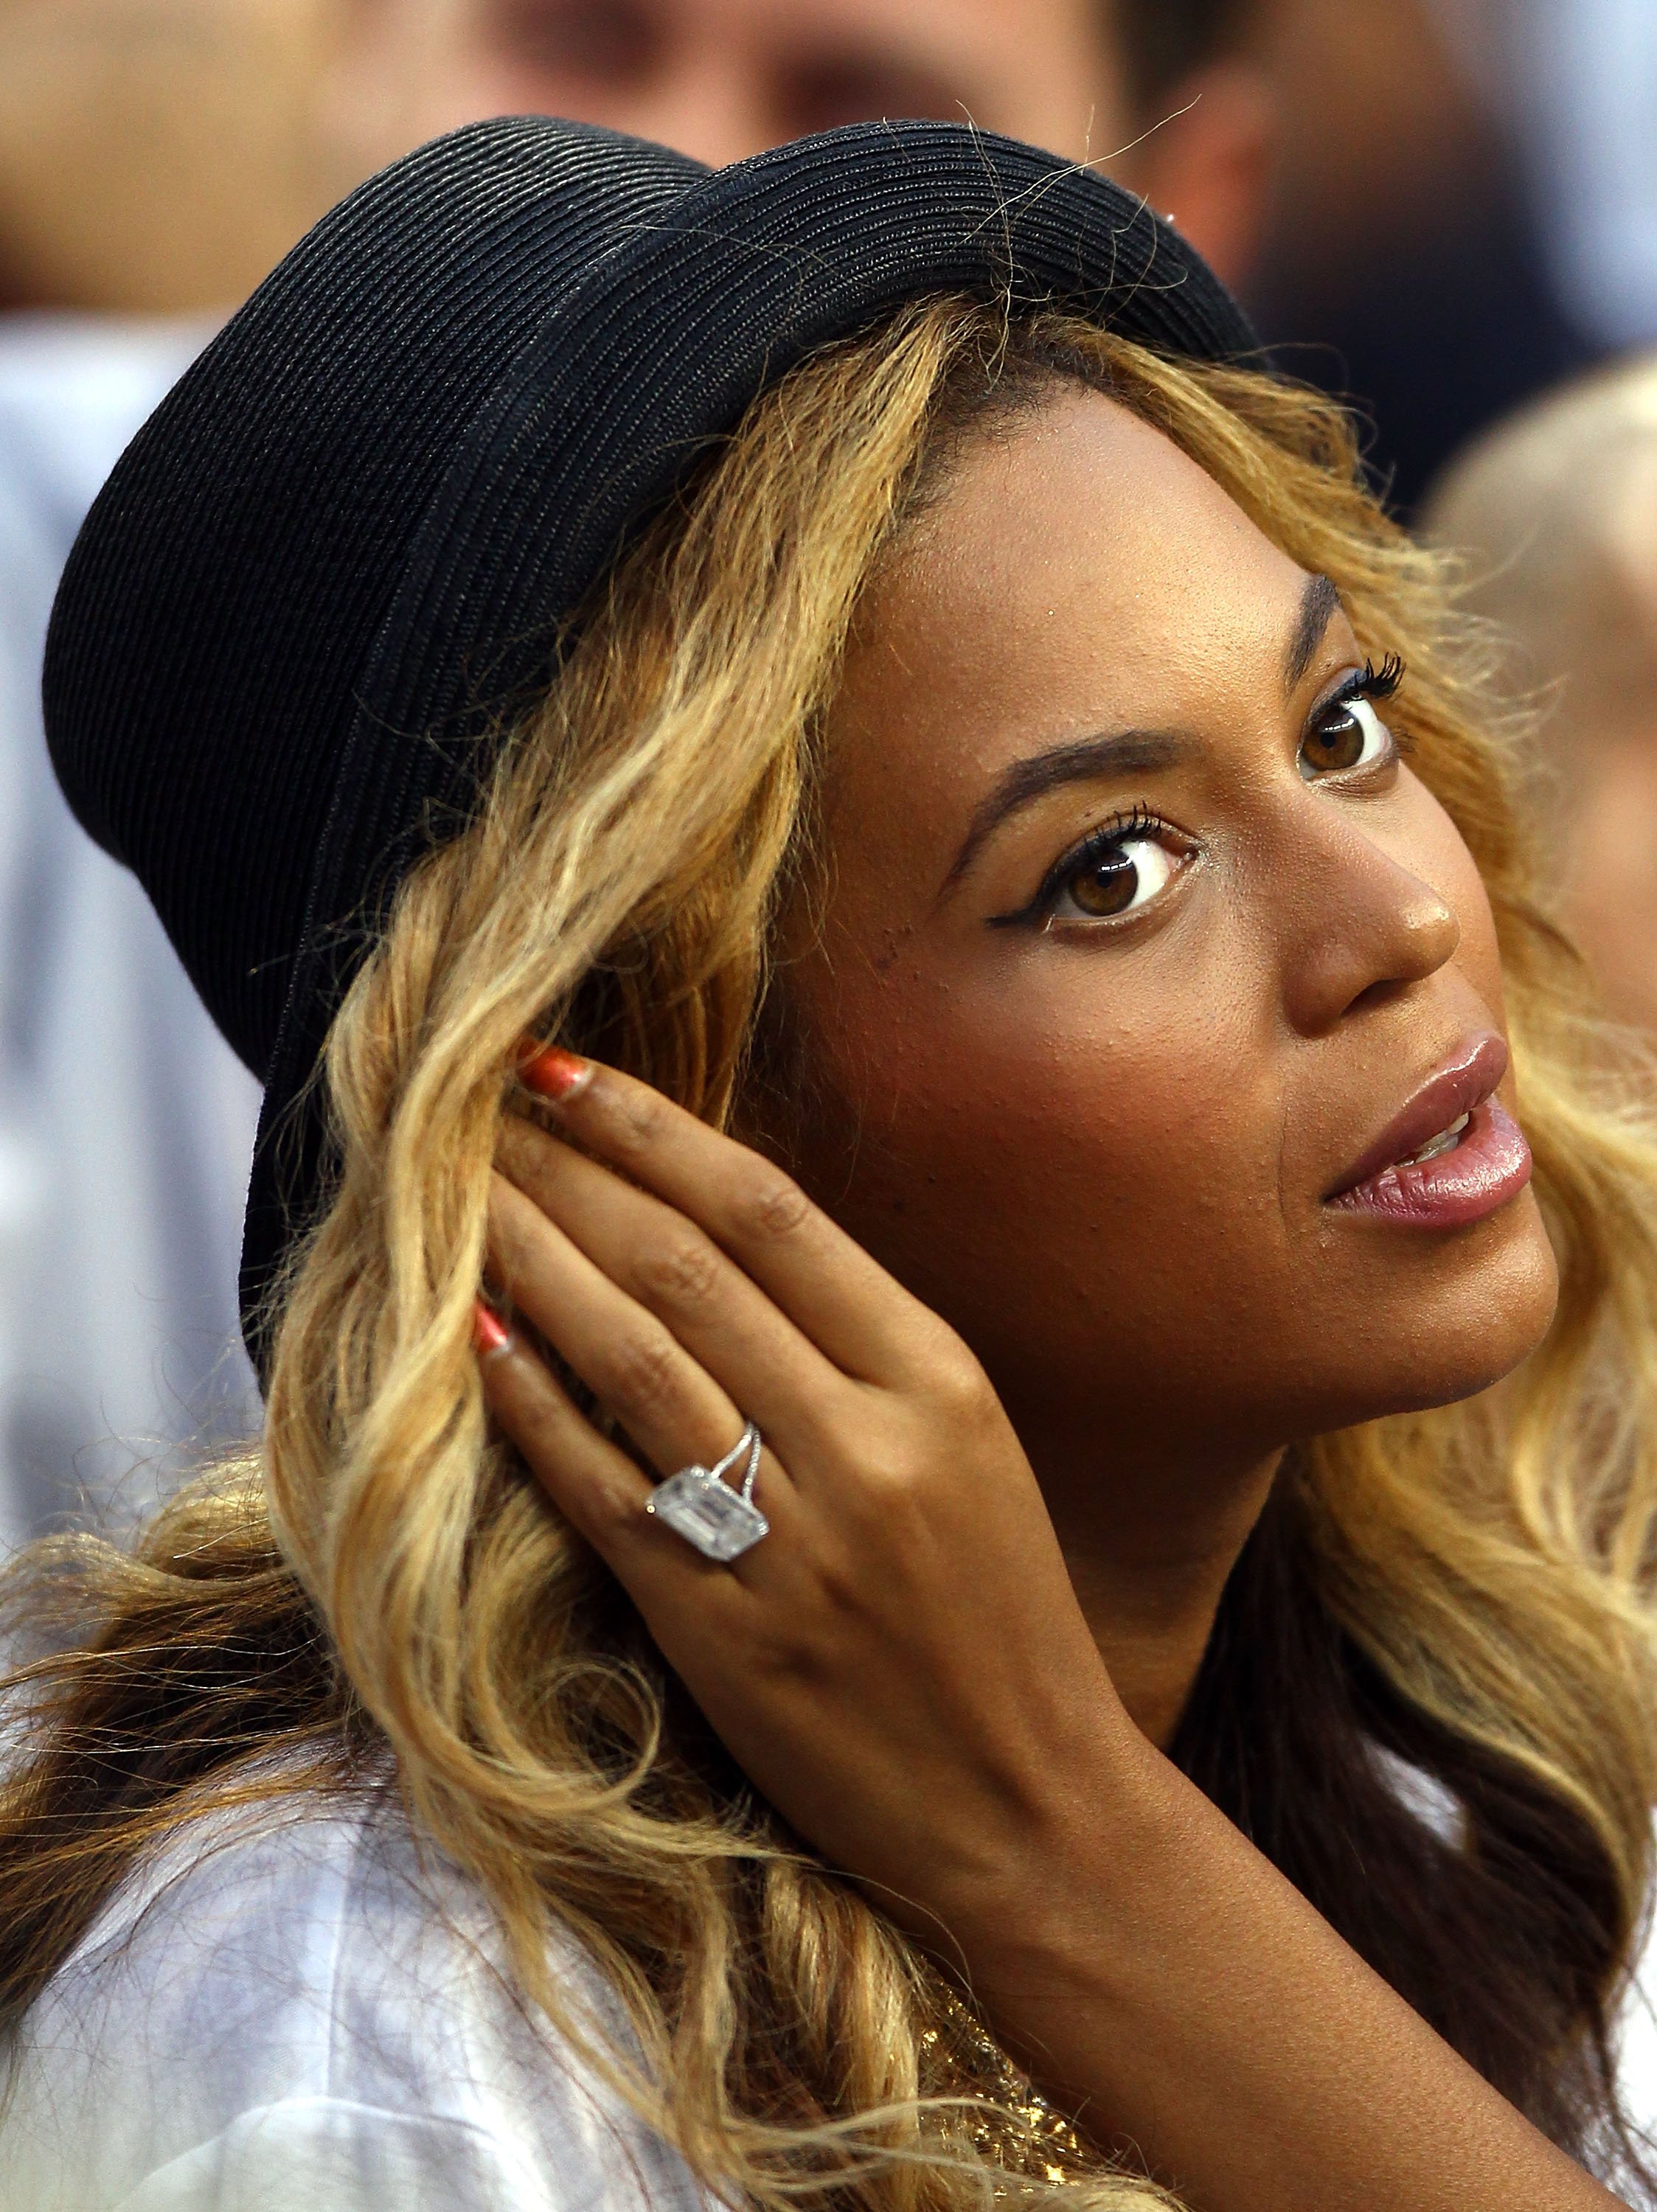 Beyoncé at a tennis game on September 12, 2011, in New York | Source: Getty Images